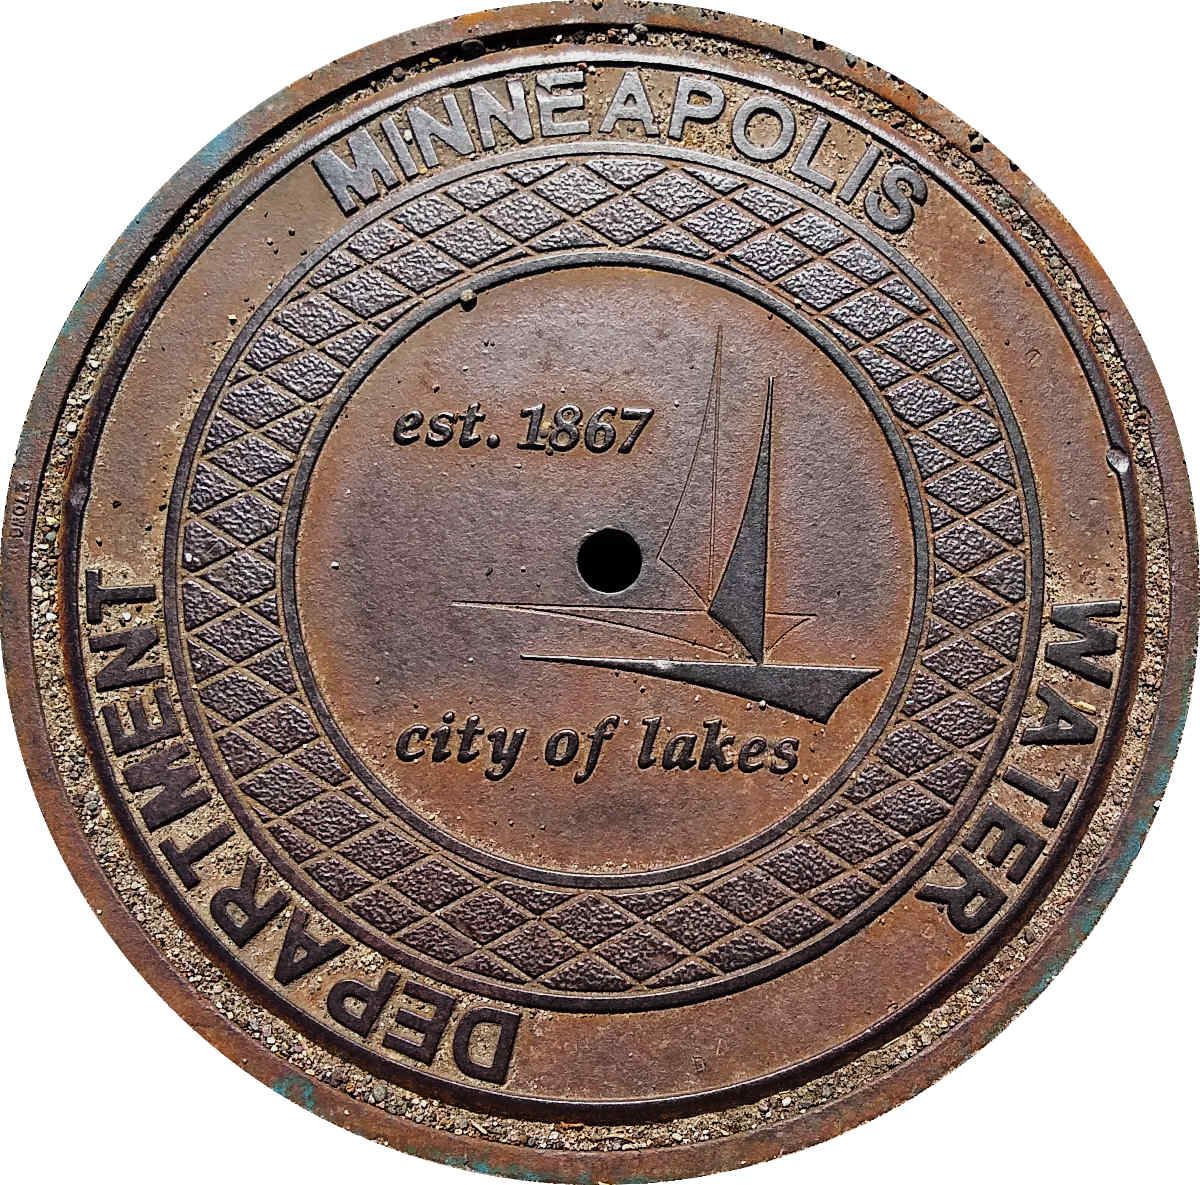 Round brown metal disk encircled with the words MINNEAPOLIS WATER DEPARTMENT with embossed designs including a sailboat silhouette in the center with the phrase "city of lakes"